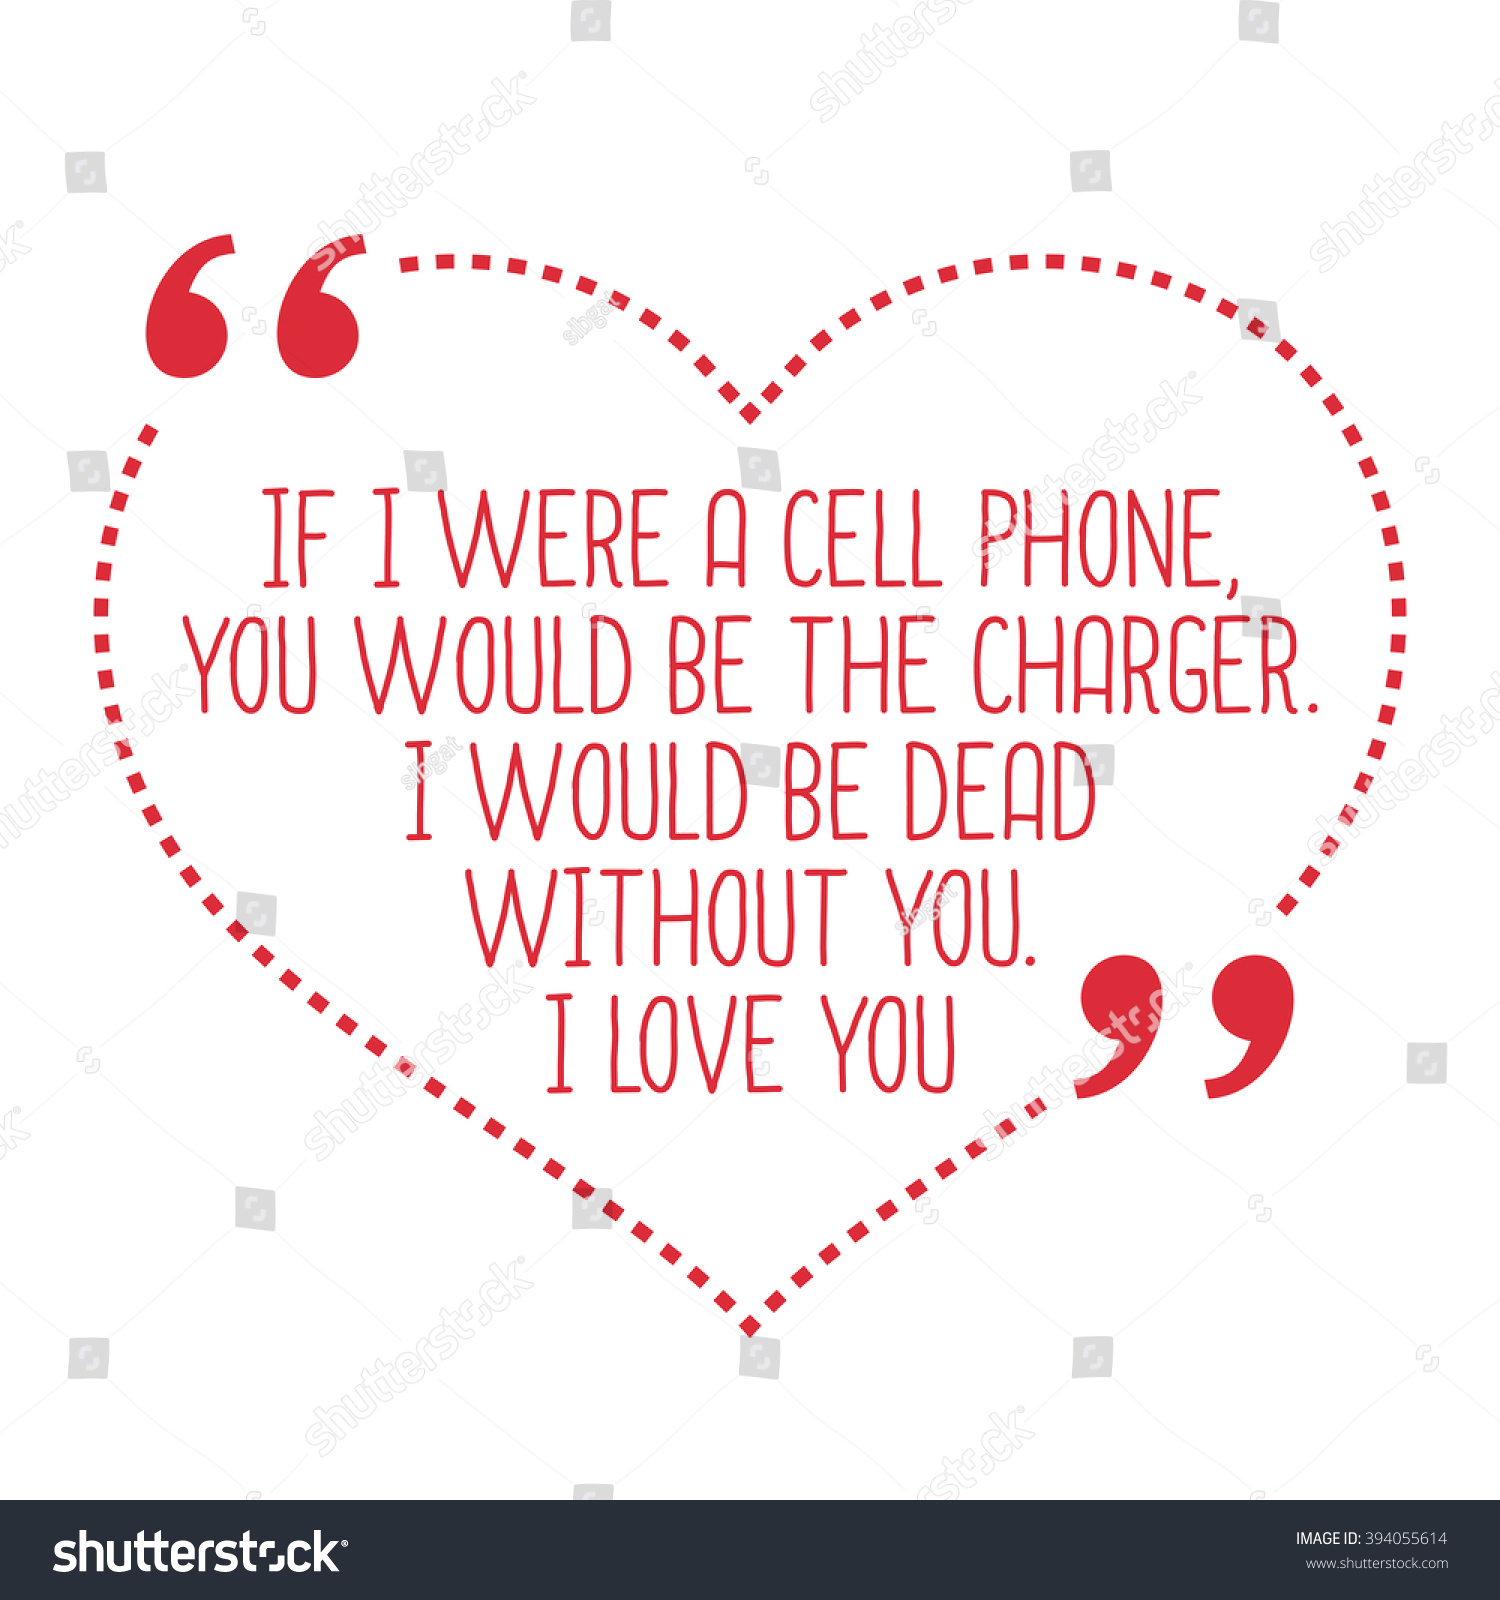 Funny love quote If I were a cell phone you would be the charger